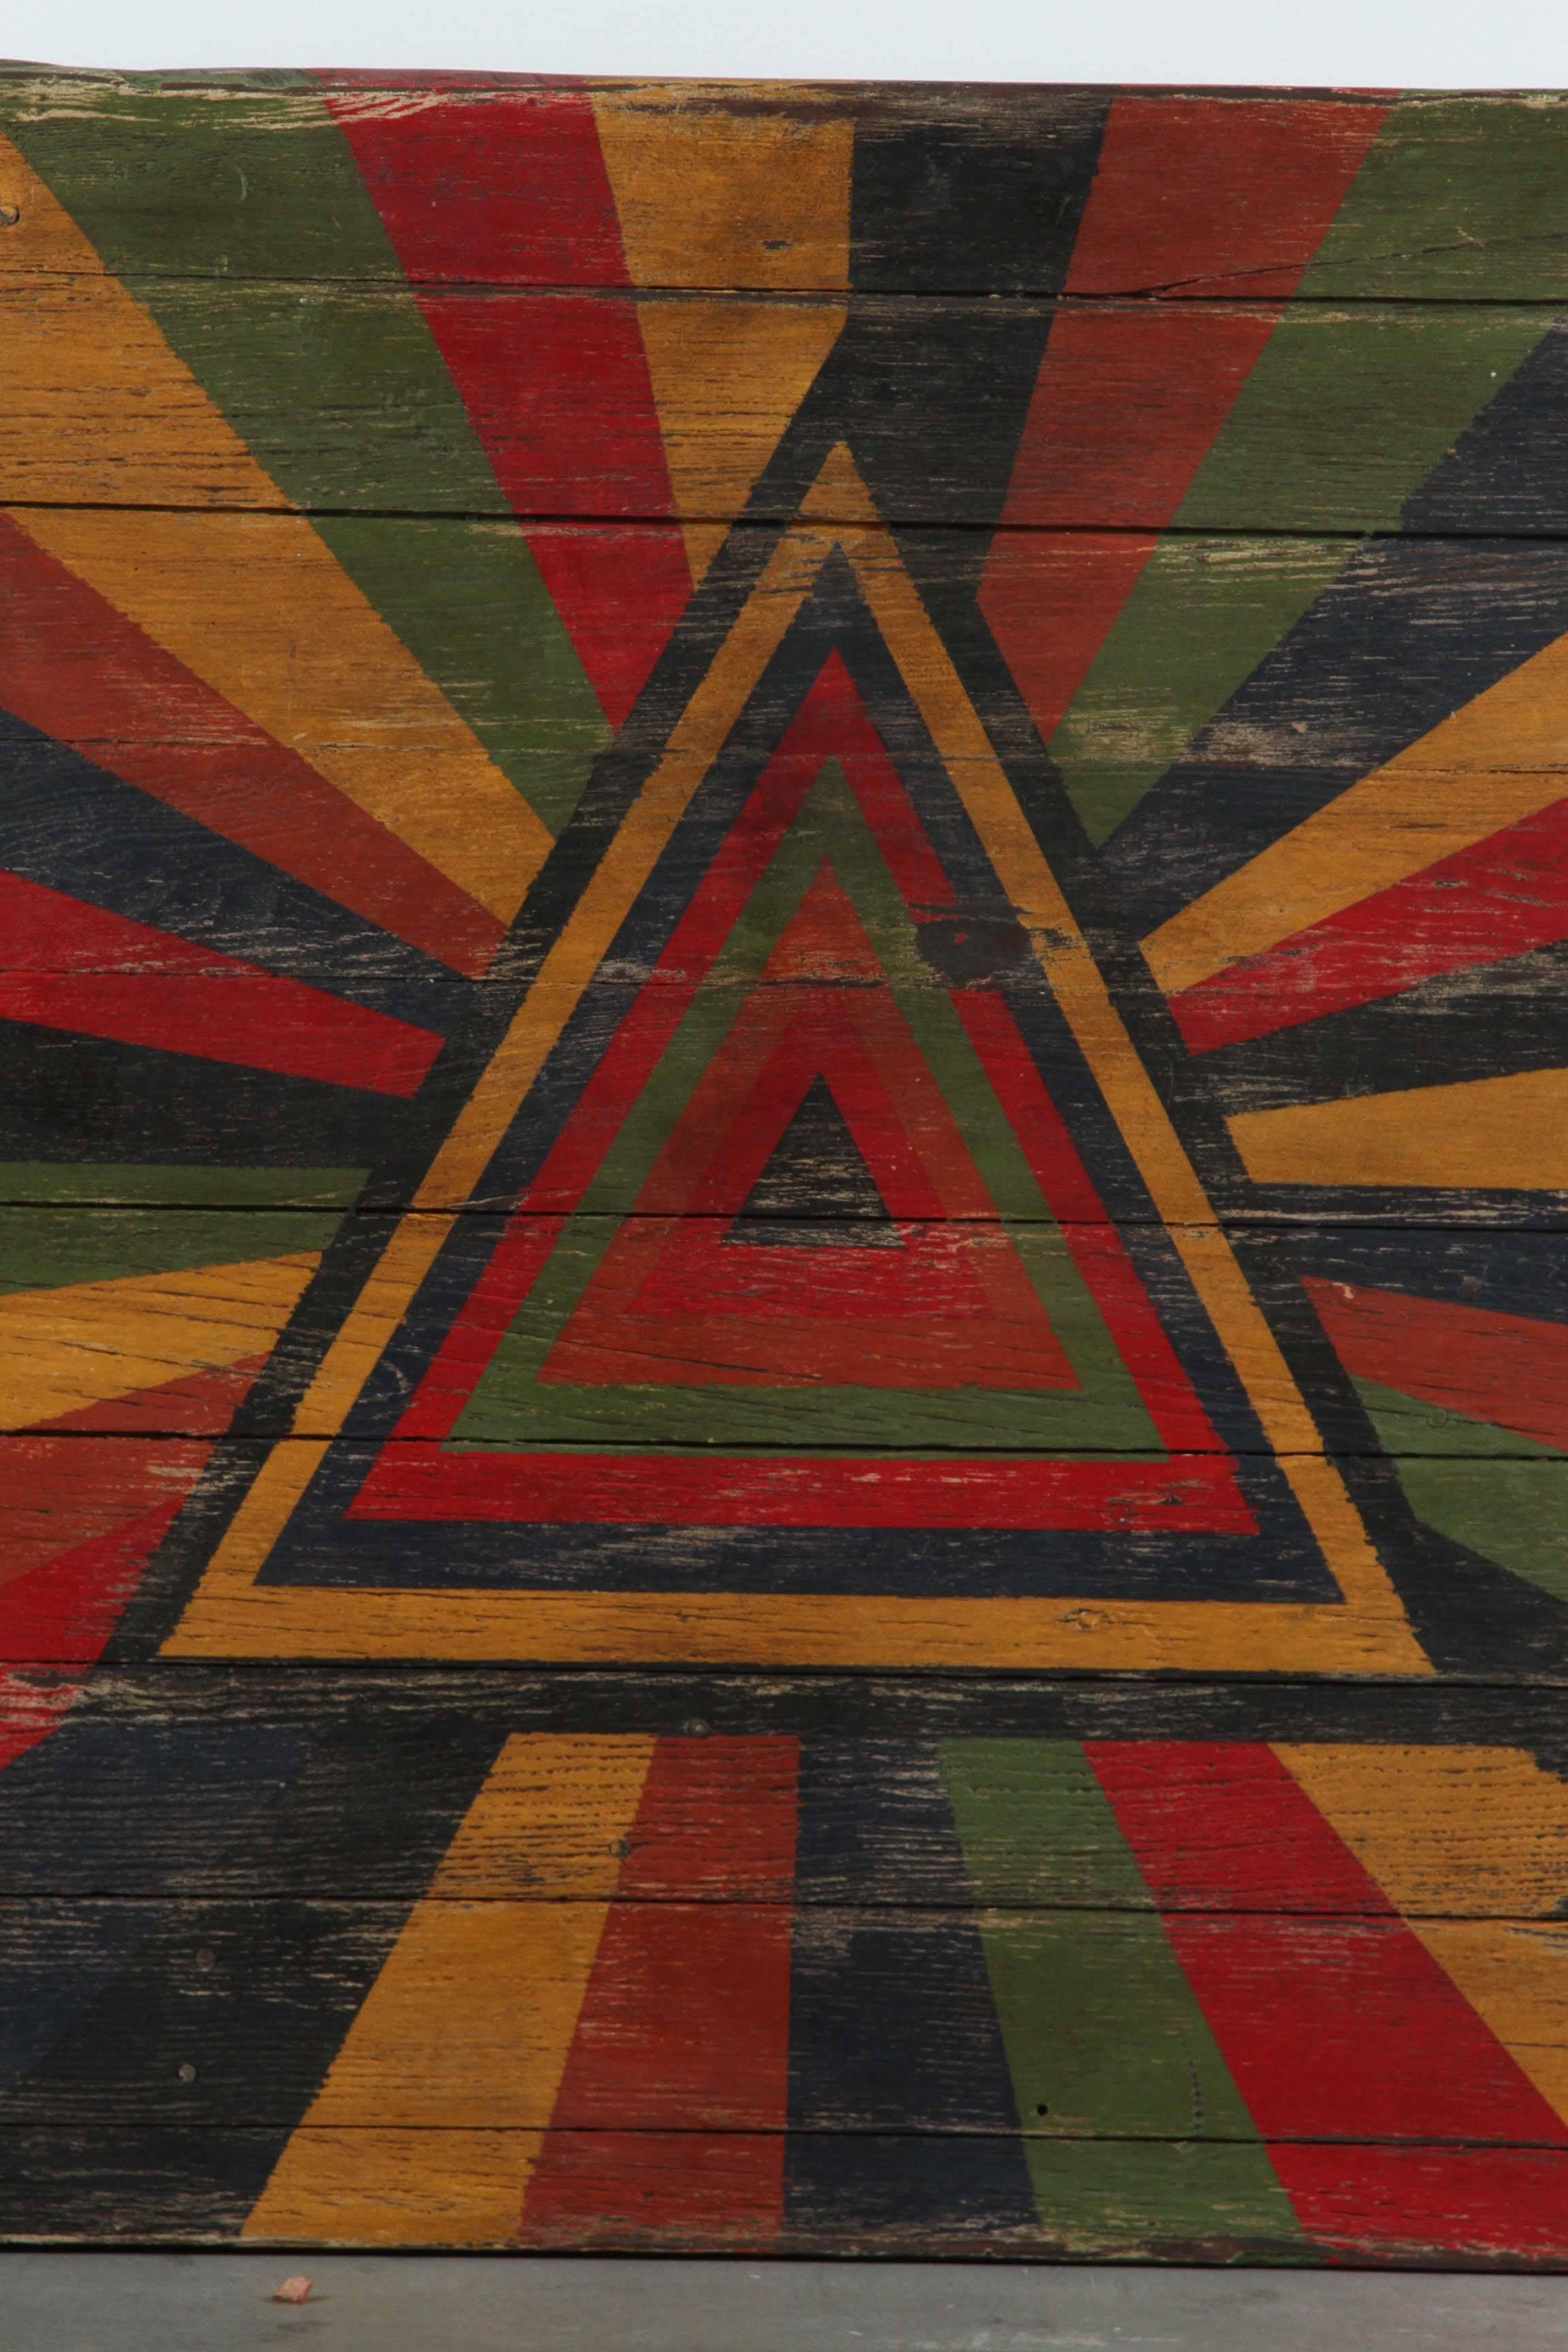 Hand-Painted Anonymous Abstract Pyramid Sunburst Painted Board For Sale